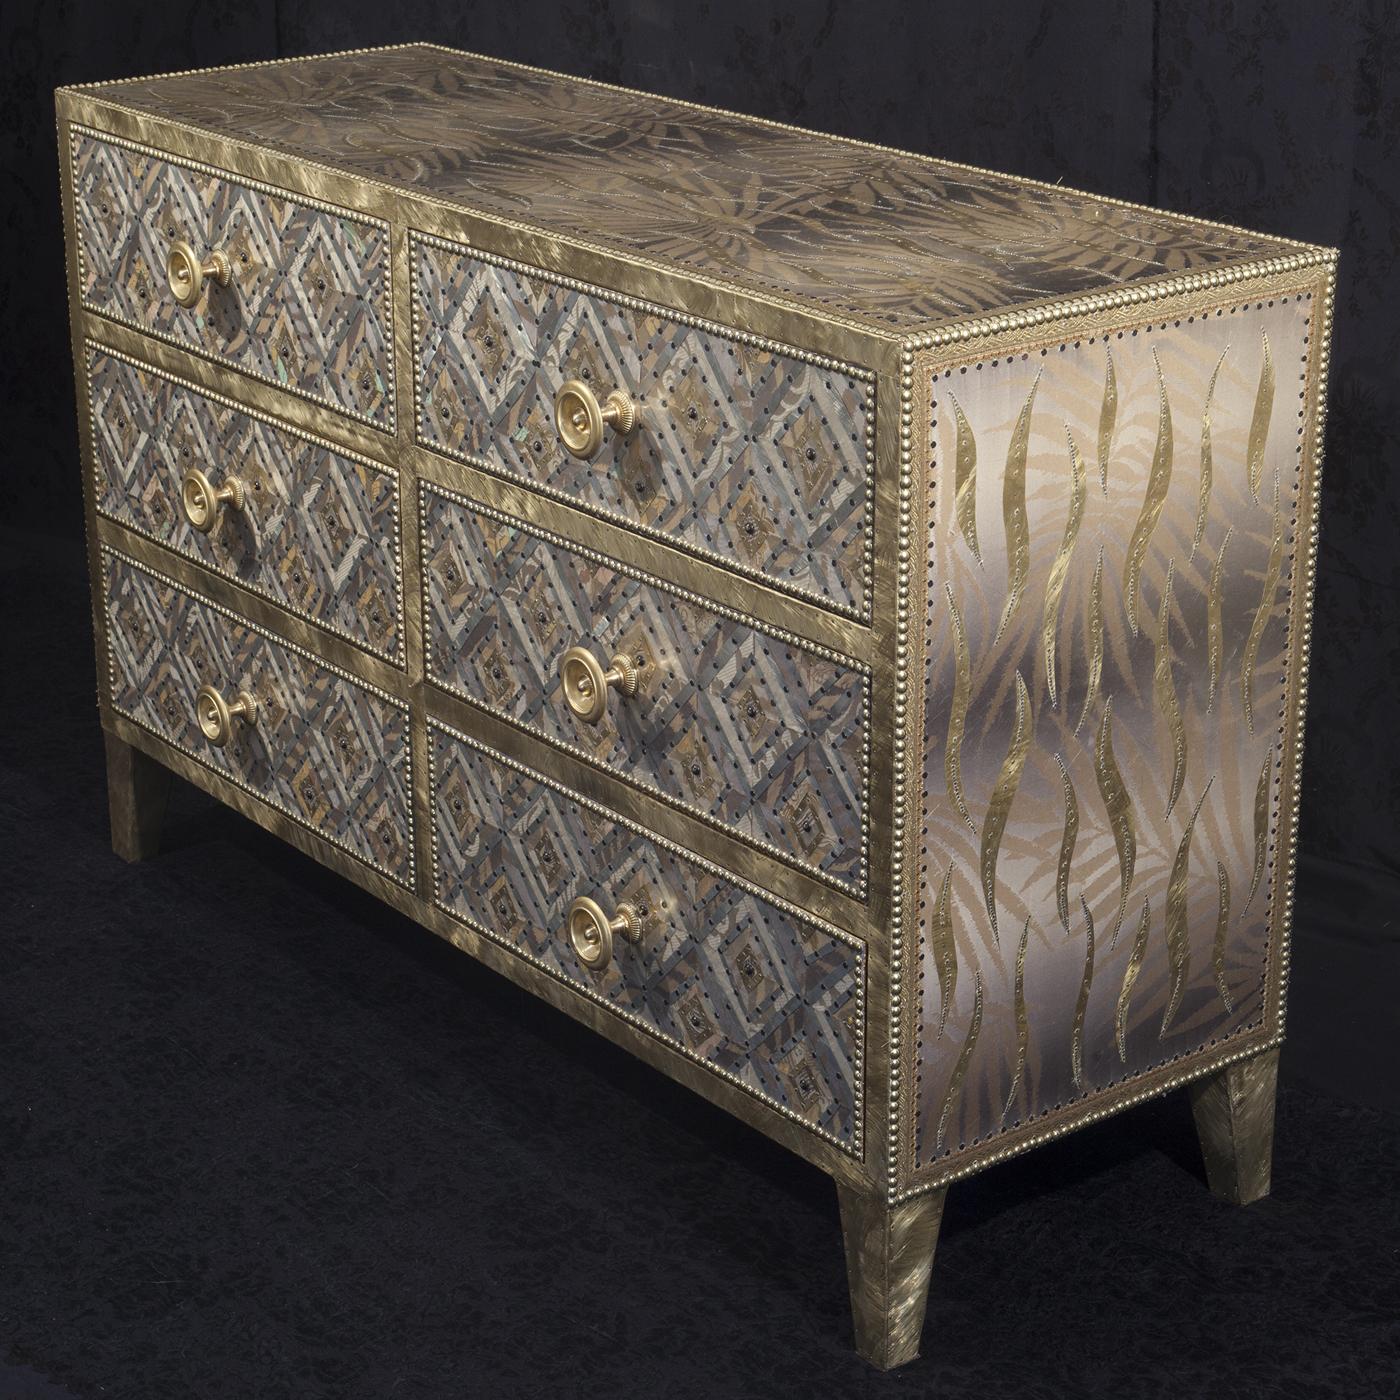 This elegant chest with three rows each featuring two drawers is made in brass and fiberglass with a striking geometrical decoration evoking an African pattern. The texture of its surface is richly adorned with metal studs for a luminous effect.